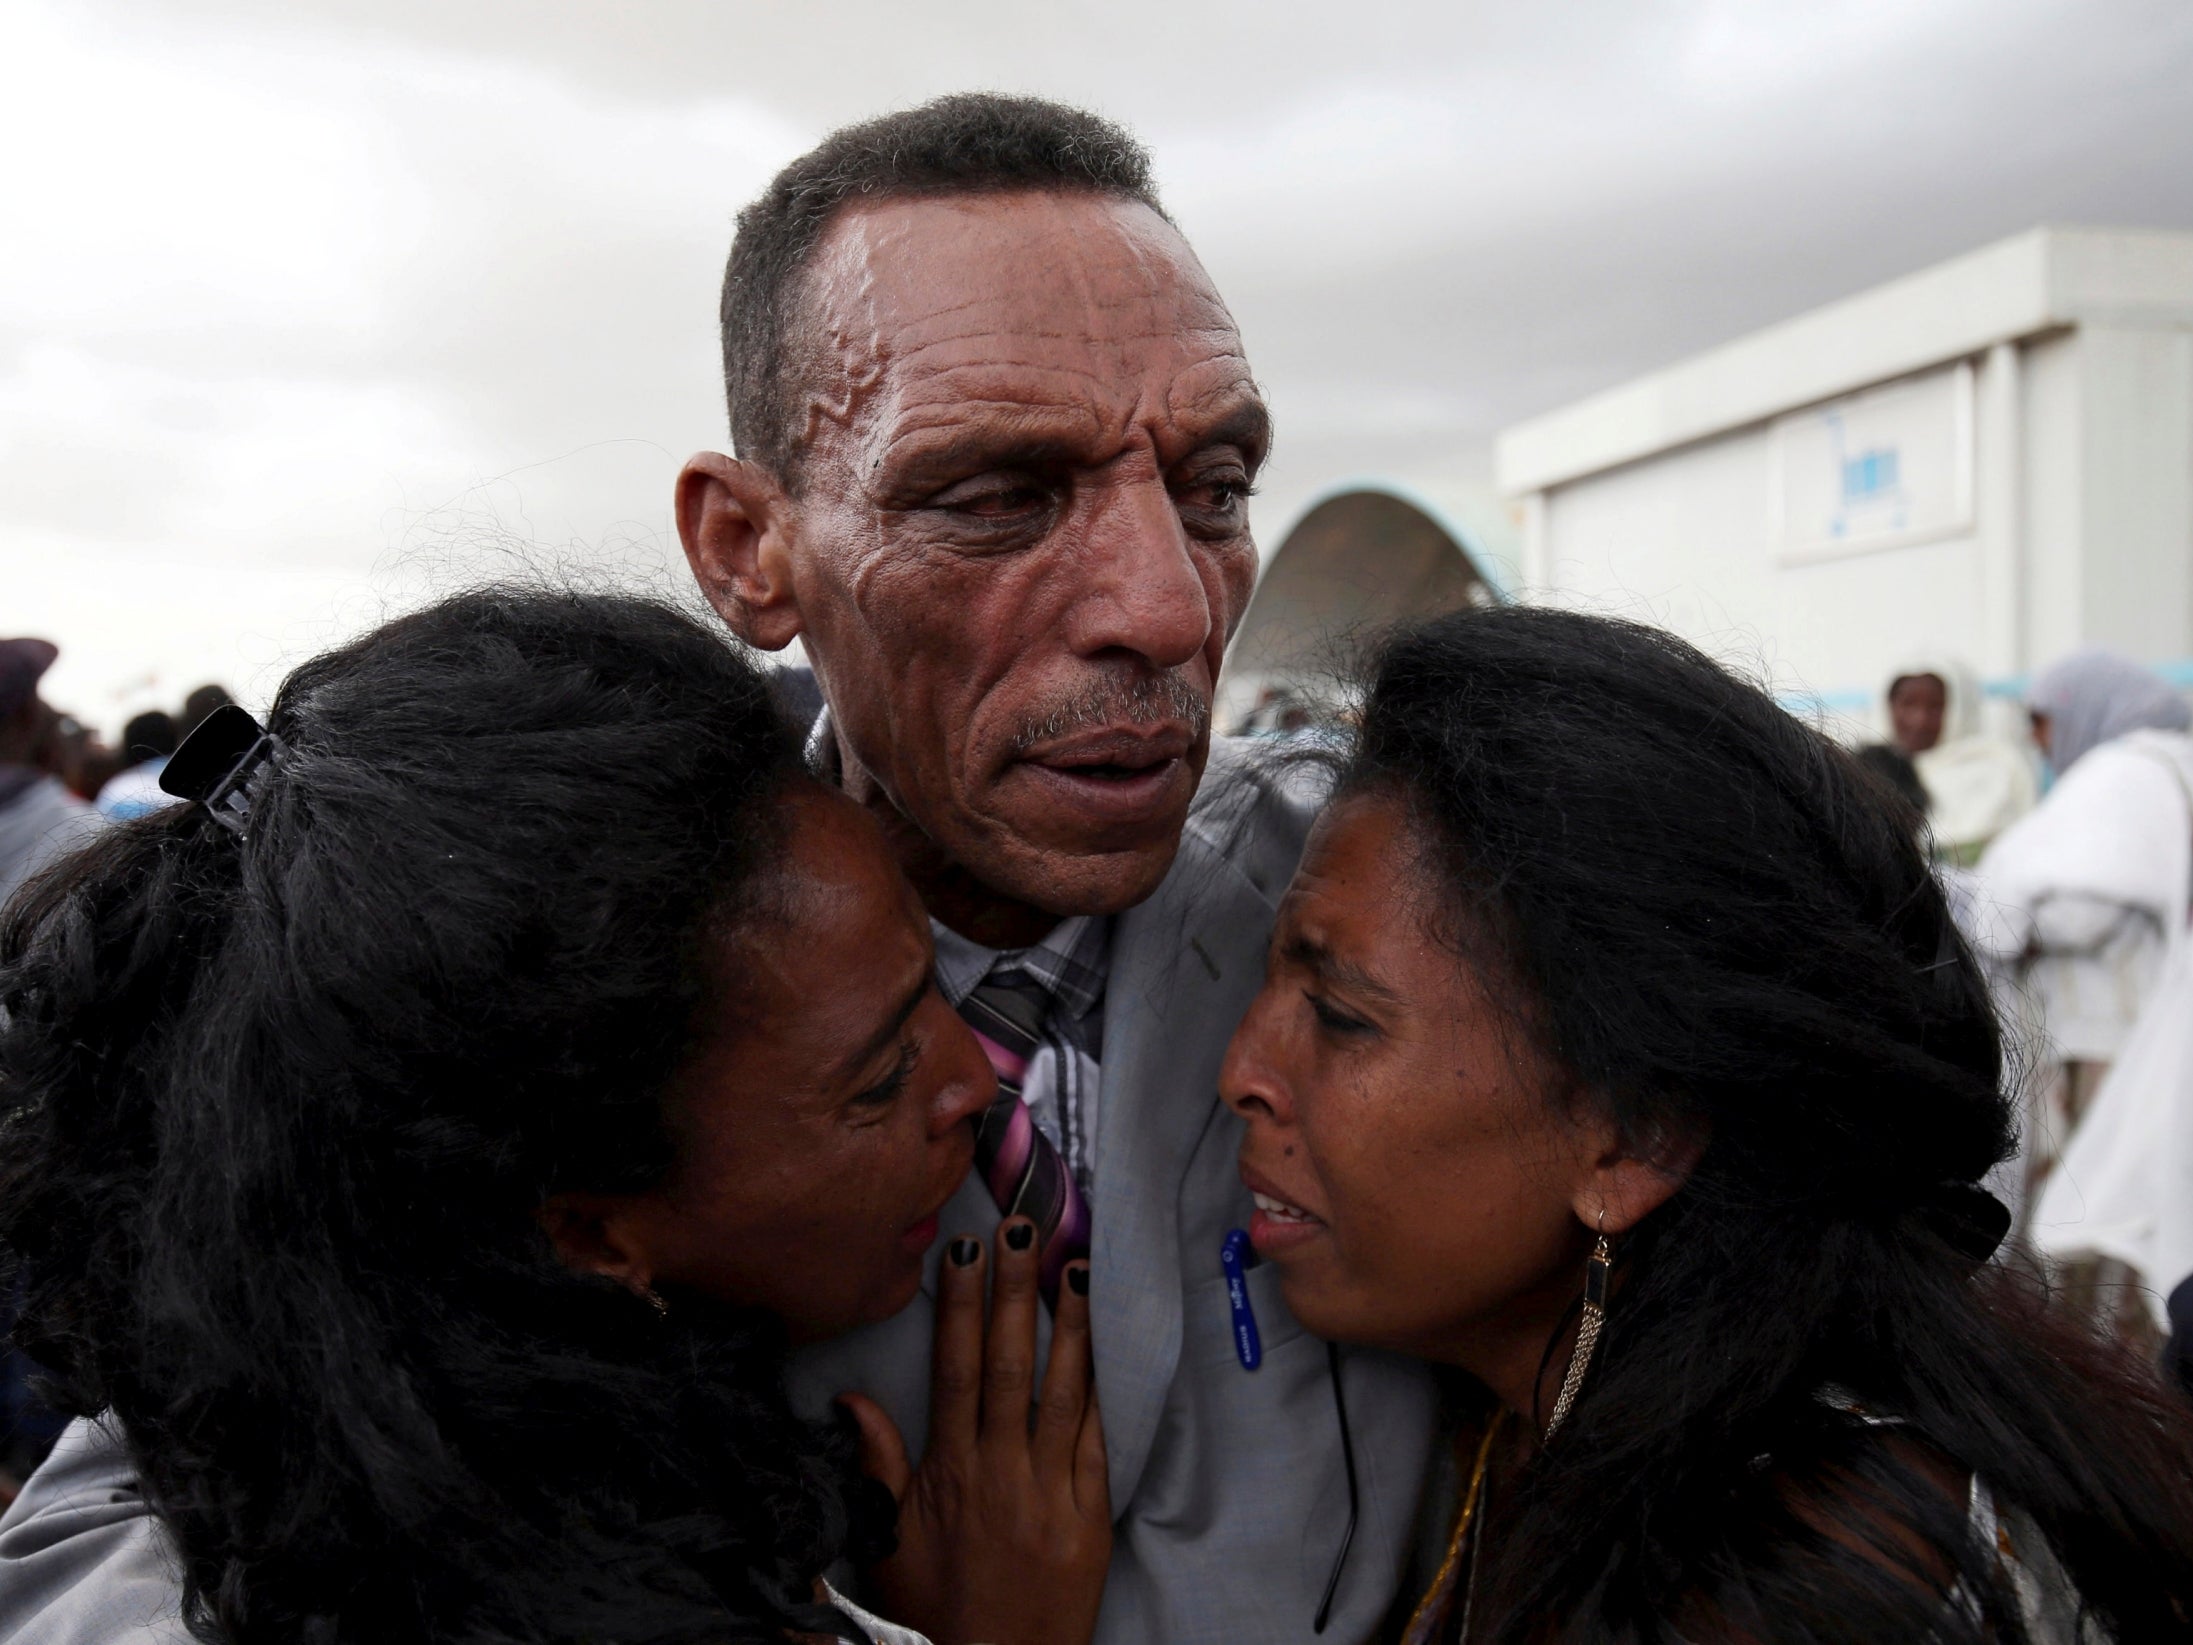 In photos Ethiopian mans reunion with family after being separated by war for 18 years The Independent The Independent